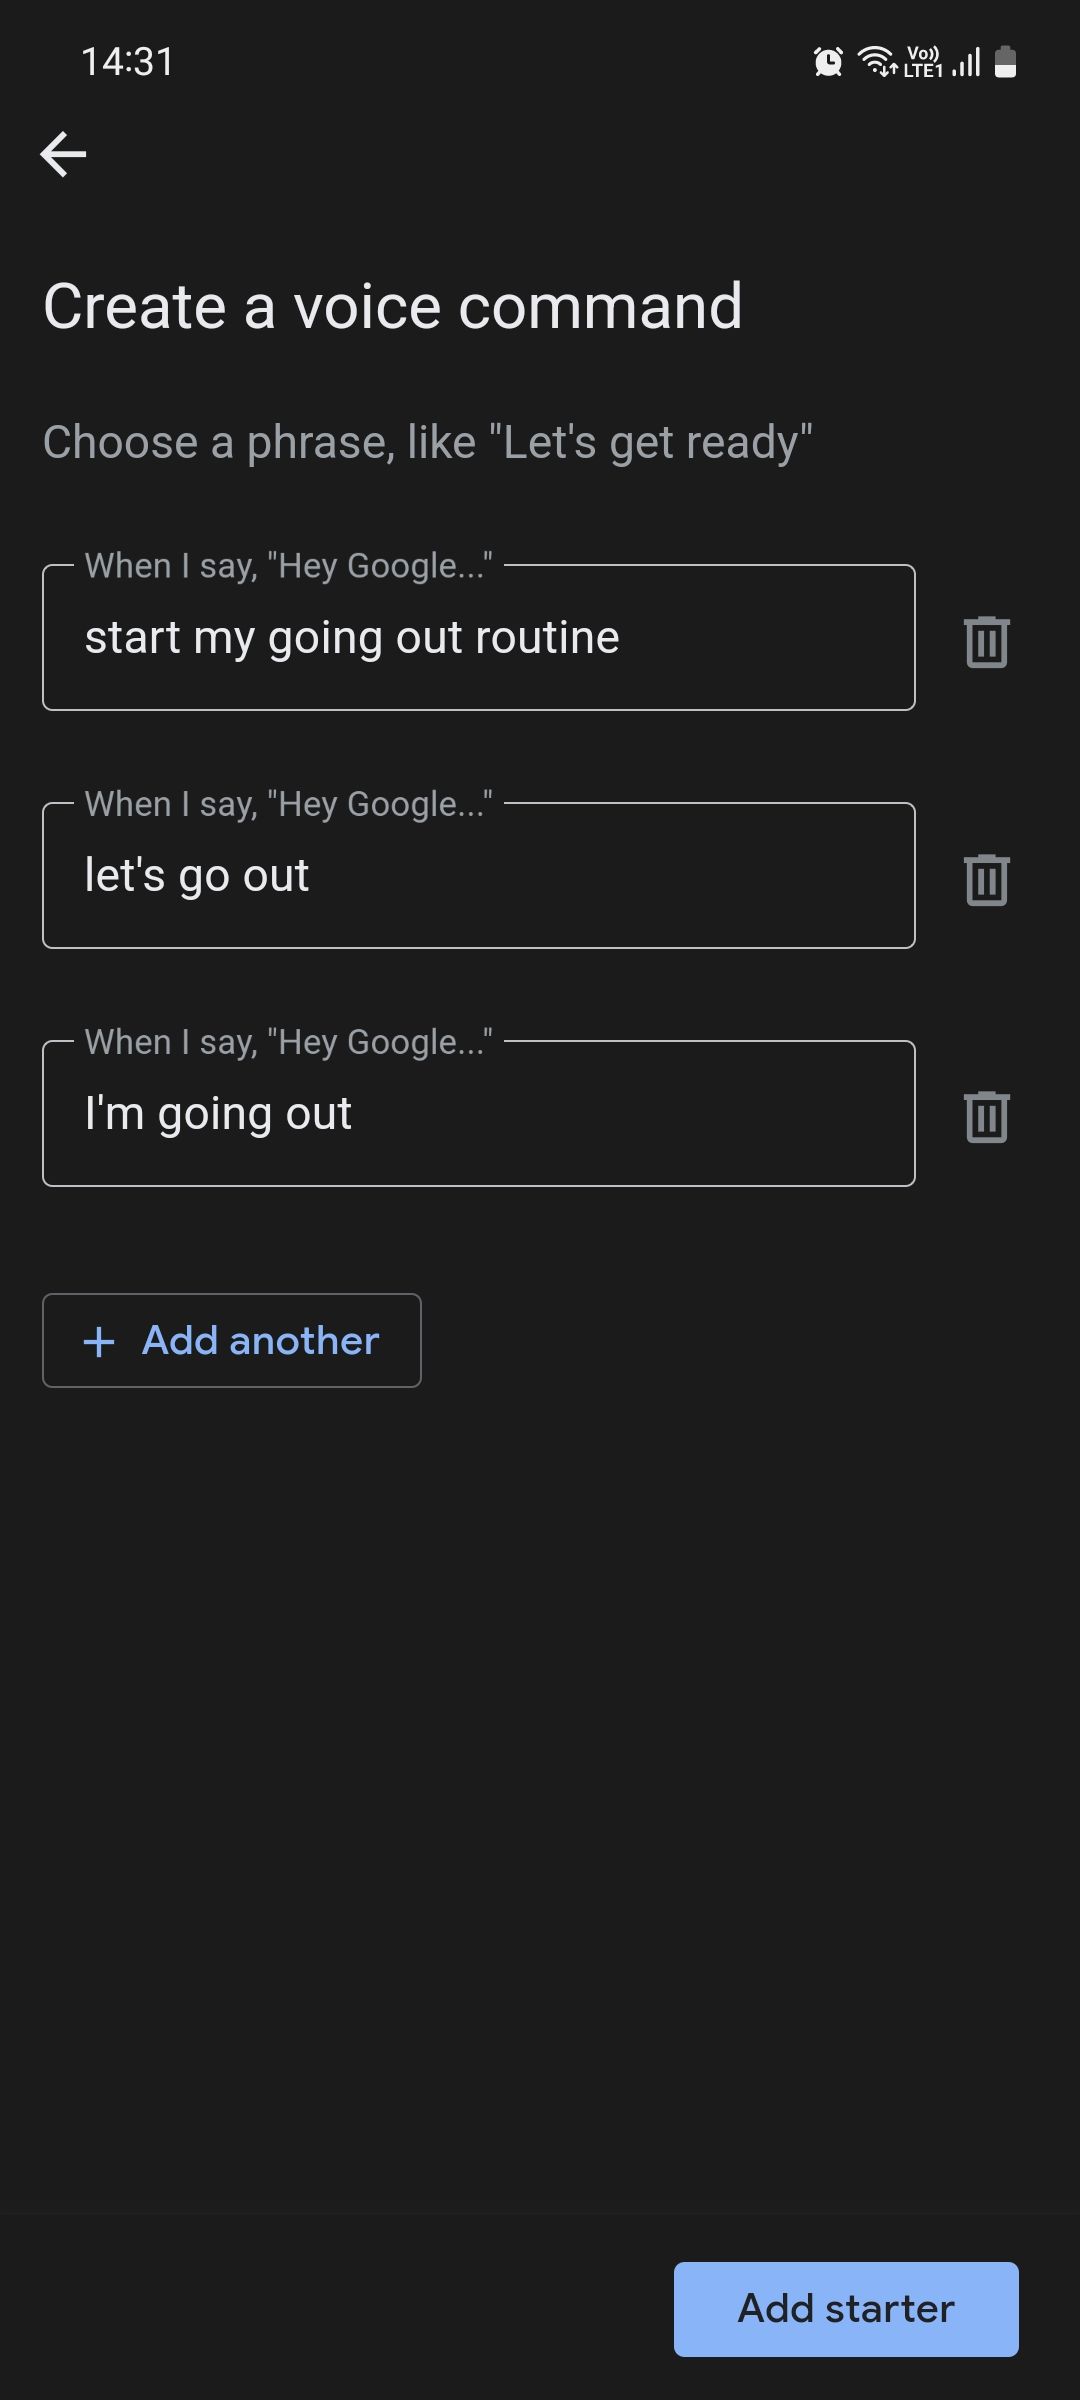 Set a voice command to trigger Google Assistant routine